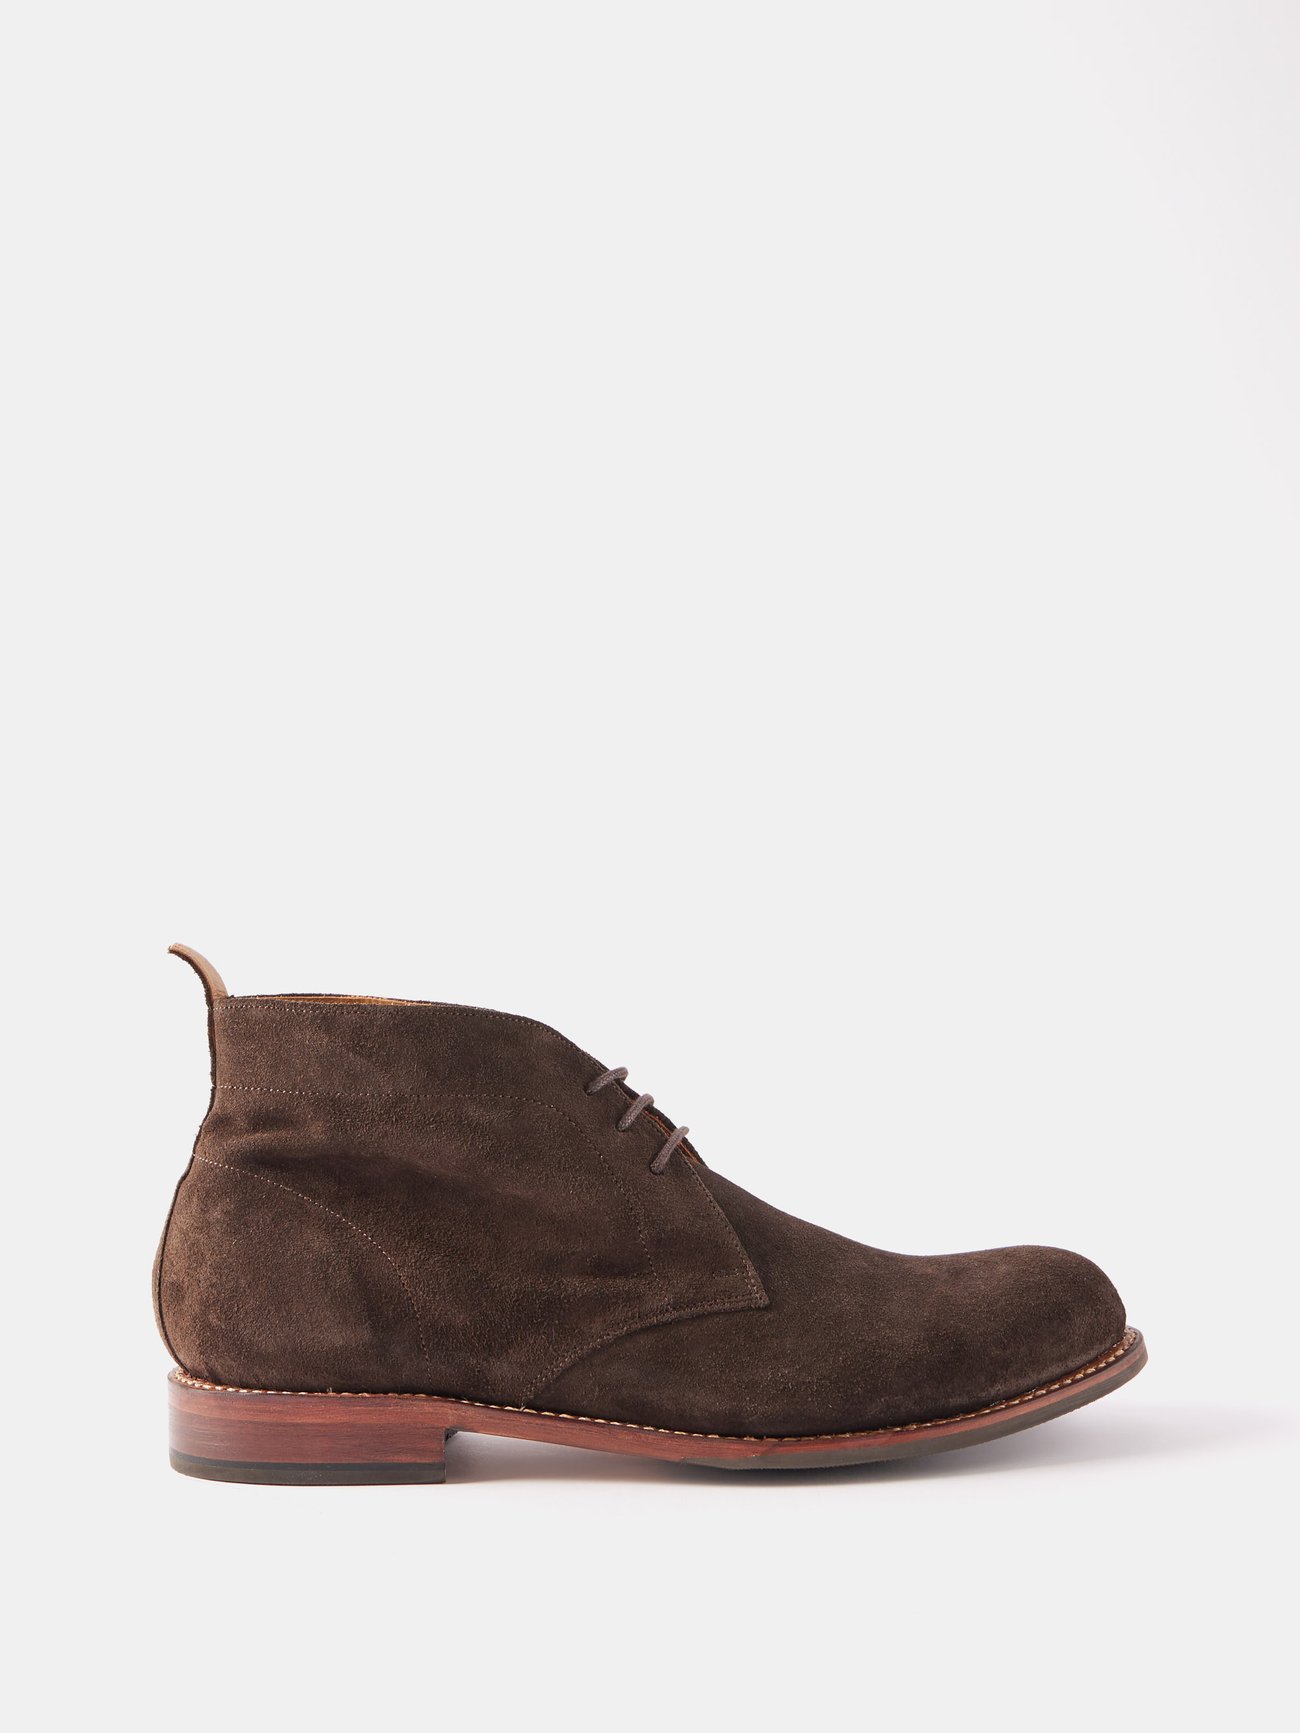 Brown Chester suede chukka boots | Grenson | MATCHES UK